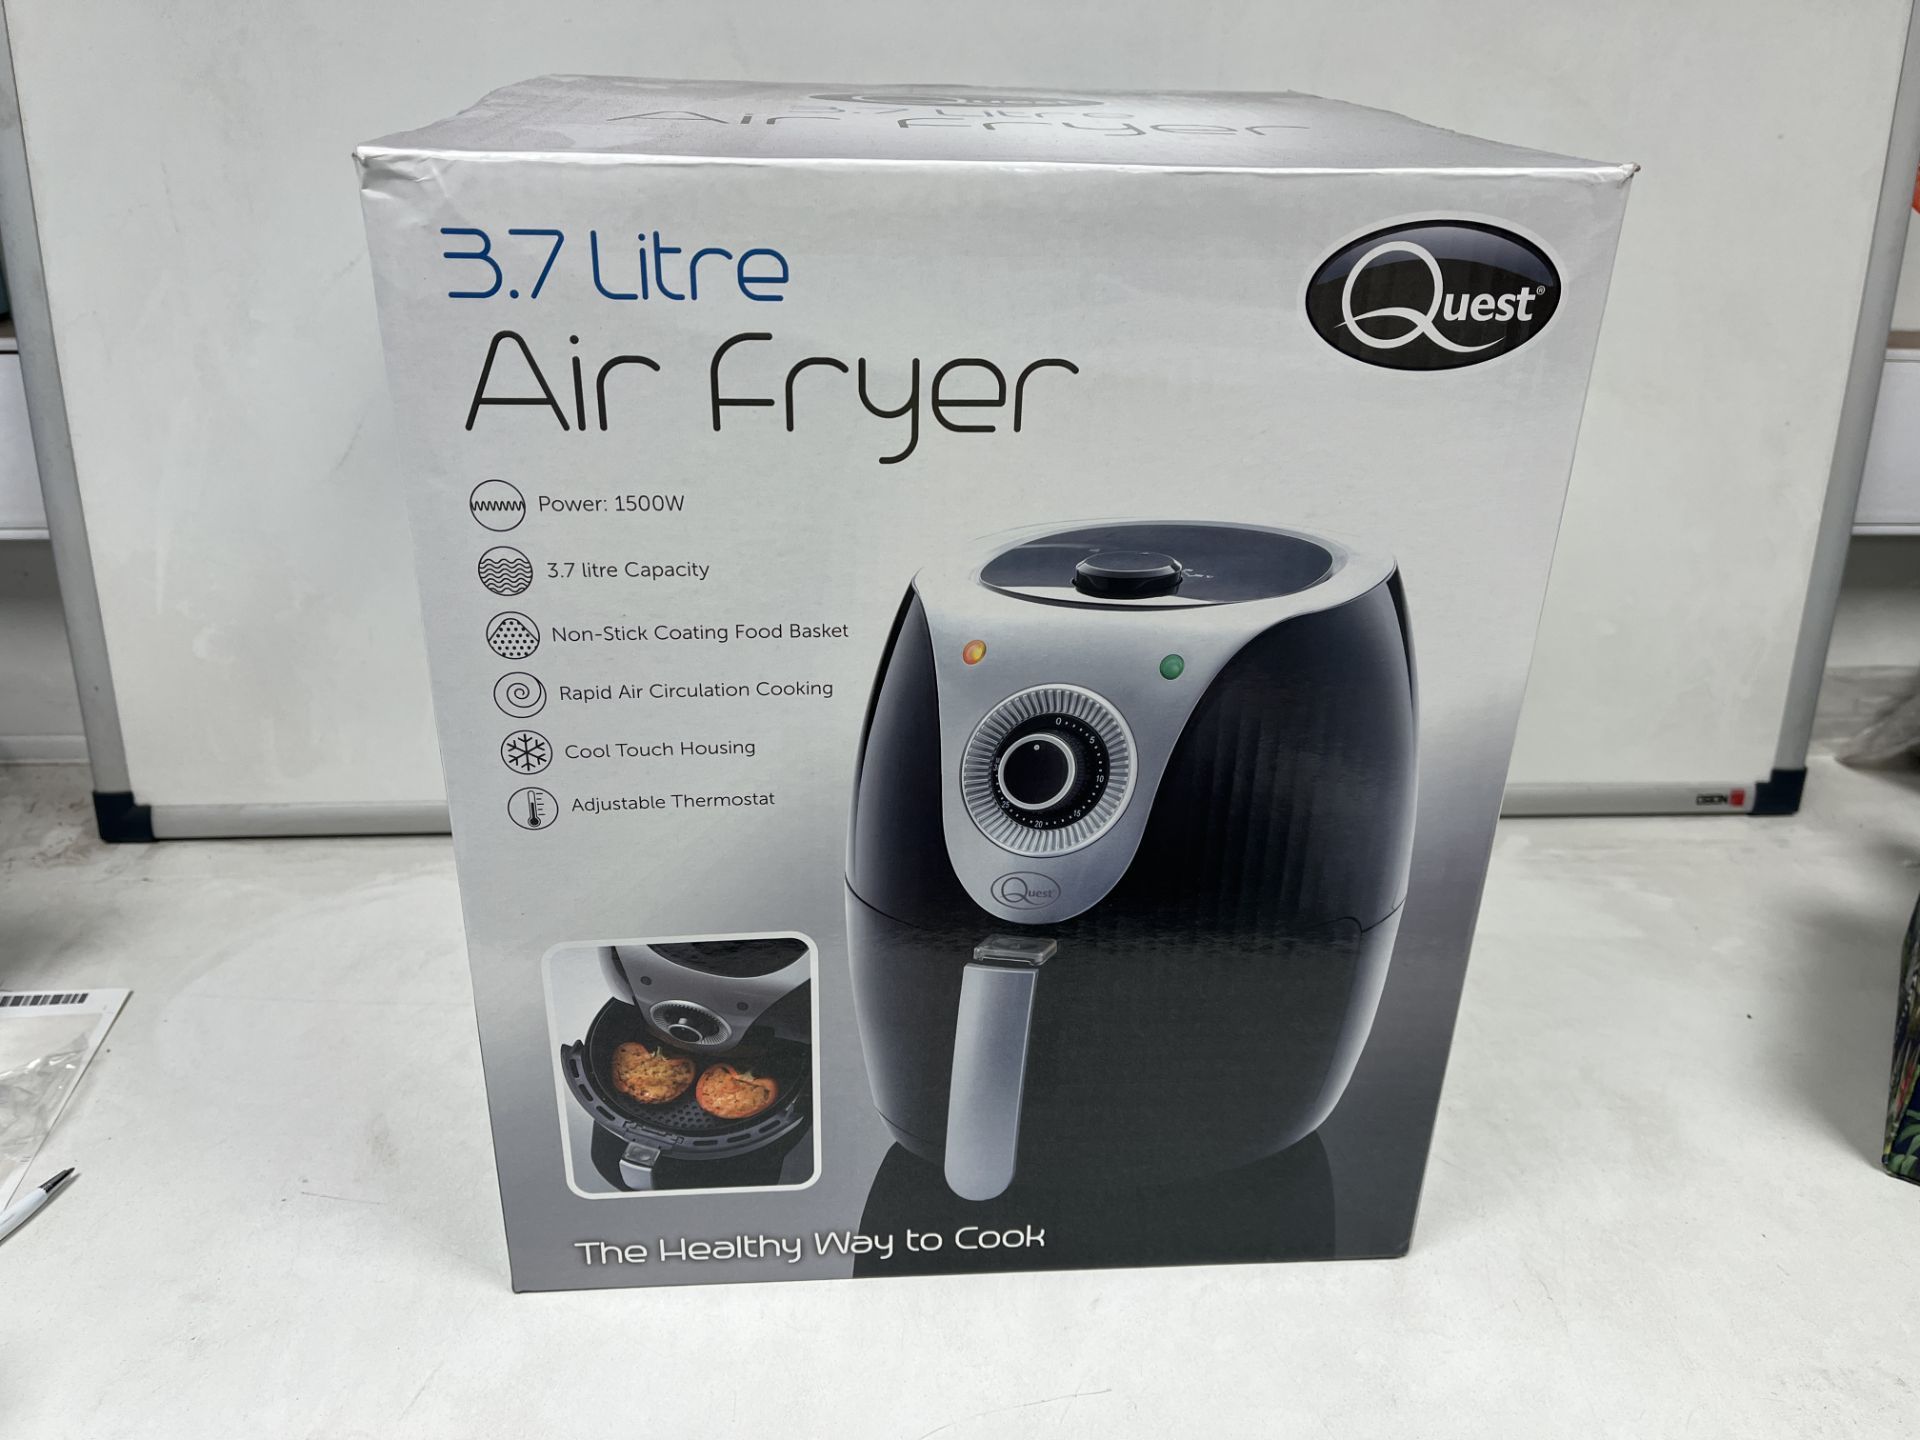 BRAND NEW QUEST 3.7L 1500W AIR FRYER, NON STICK COATING FOOD BASKET, RAPID AIR CIRCULATION